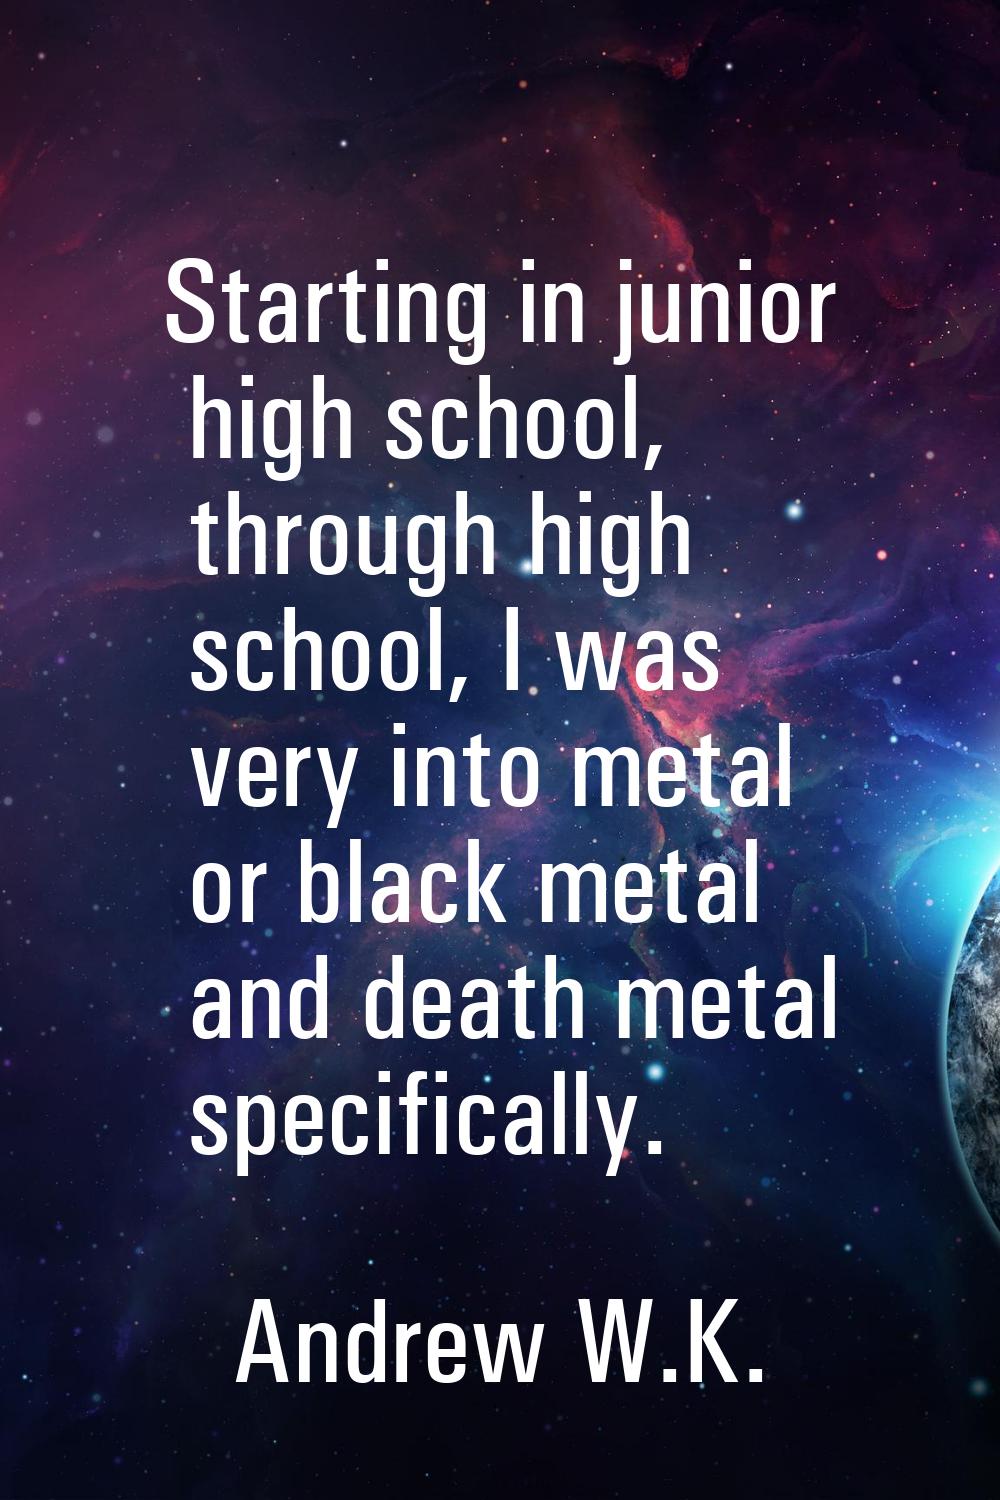 Starting in junior high school, through high school, I was very into metal or black metal and death